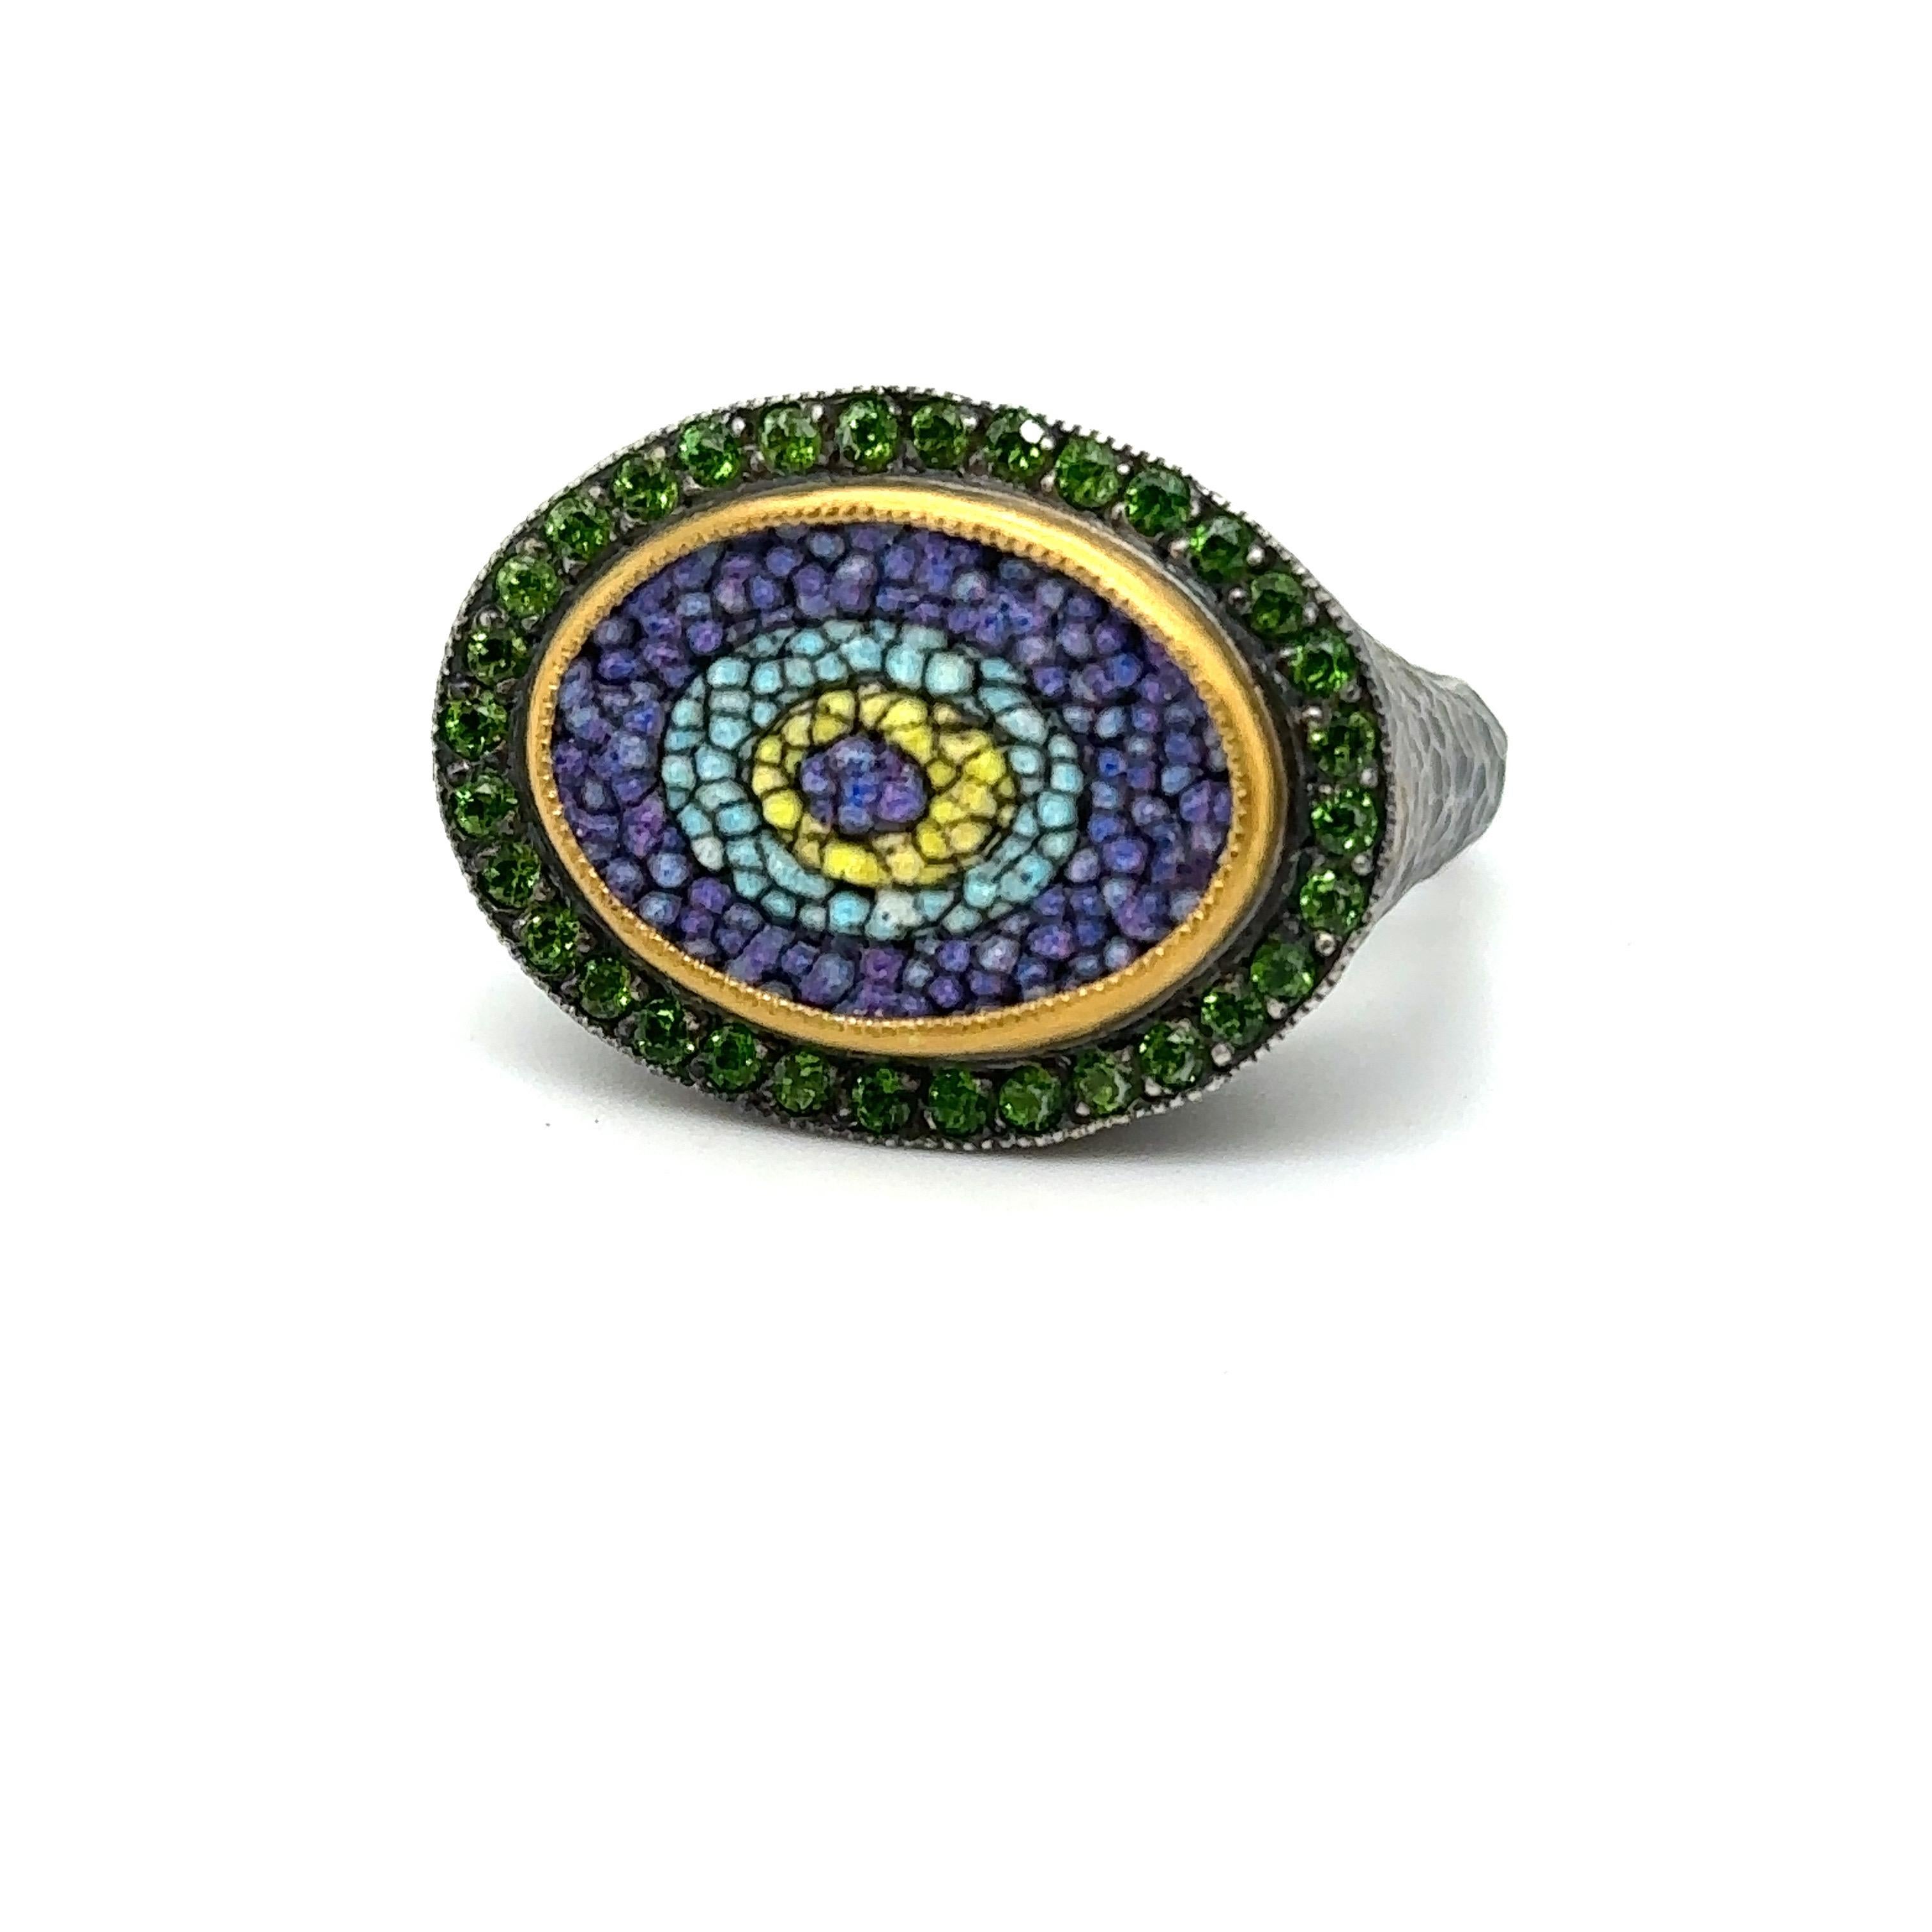 JAS-19-1965 - 24KT GOLD/SS EVIL EYE MOSAIC RING with 0.60CT CHROME DIOPSIDES For Sale 1